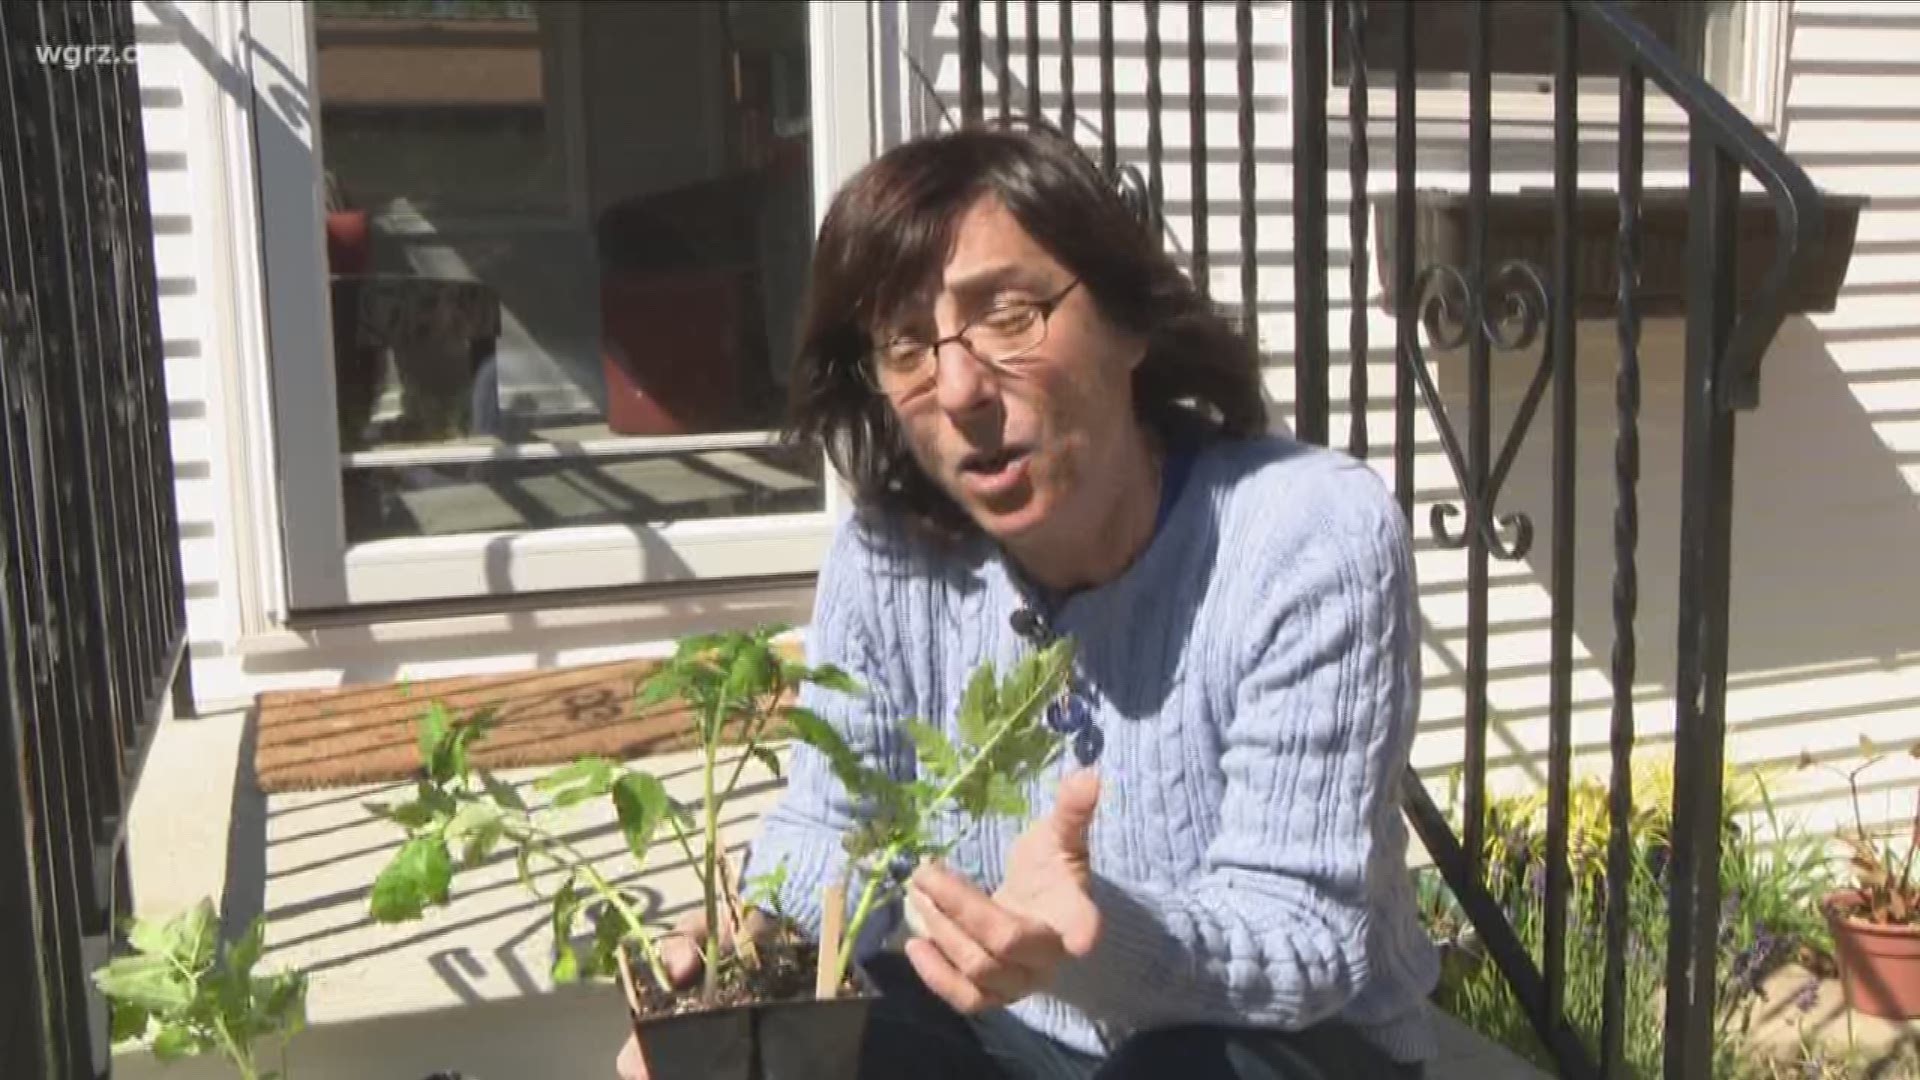 Gardening expert Jackie Albarella shares some tips to make sure your tomato plants thrive in your vegetable garden this season.